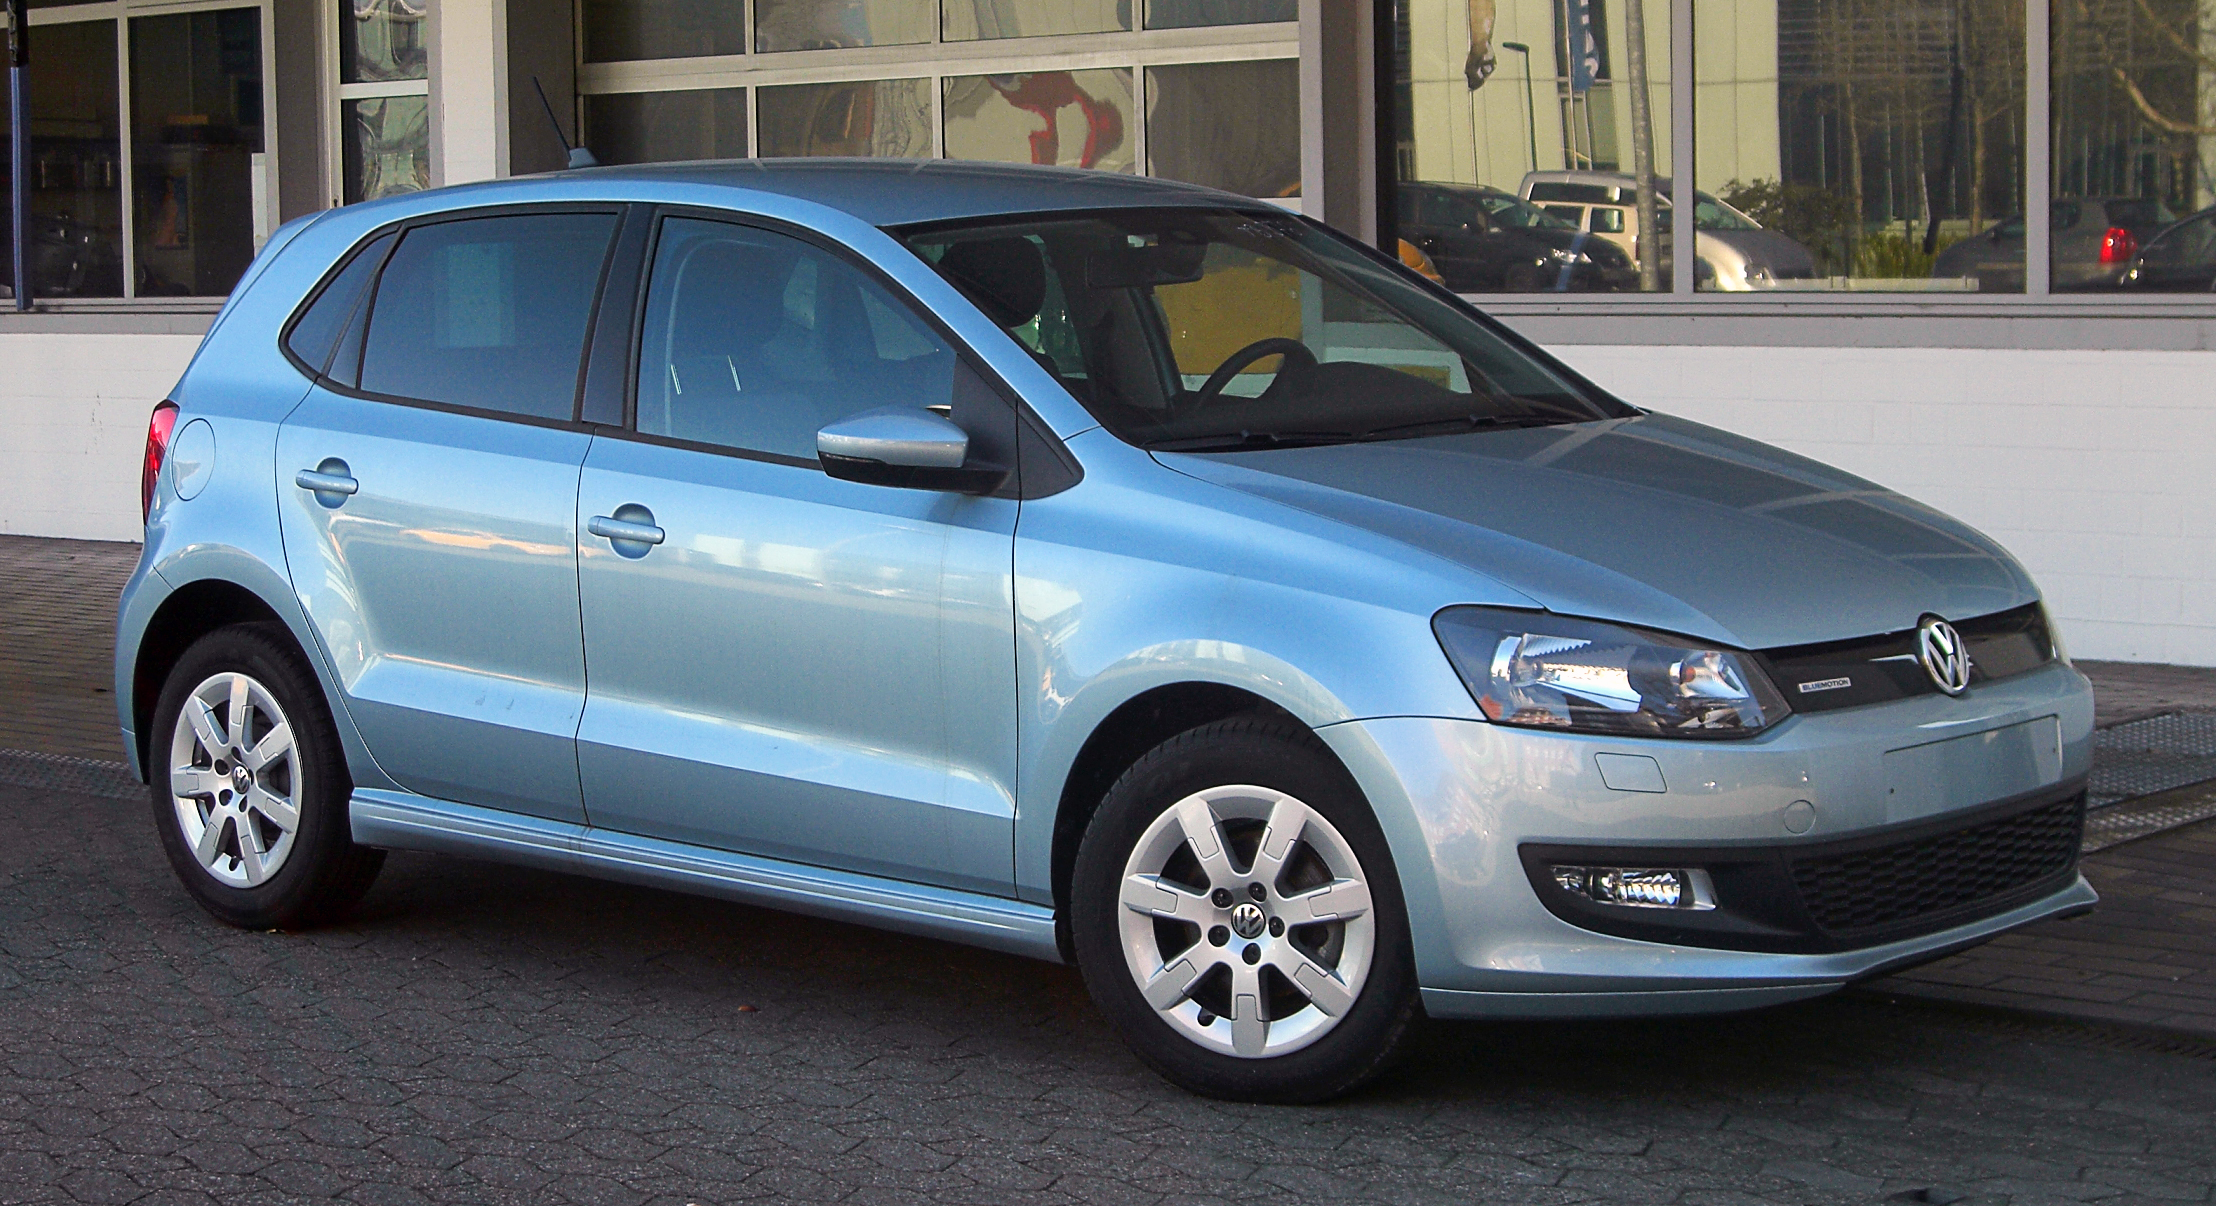 VW Polo 1.2 TDI BlueMotion technical details, history